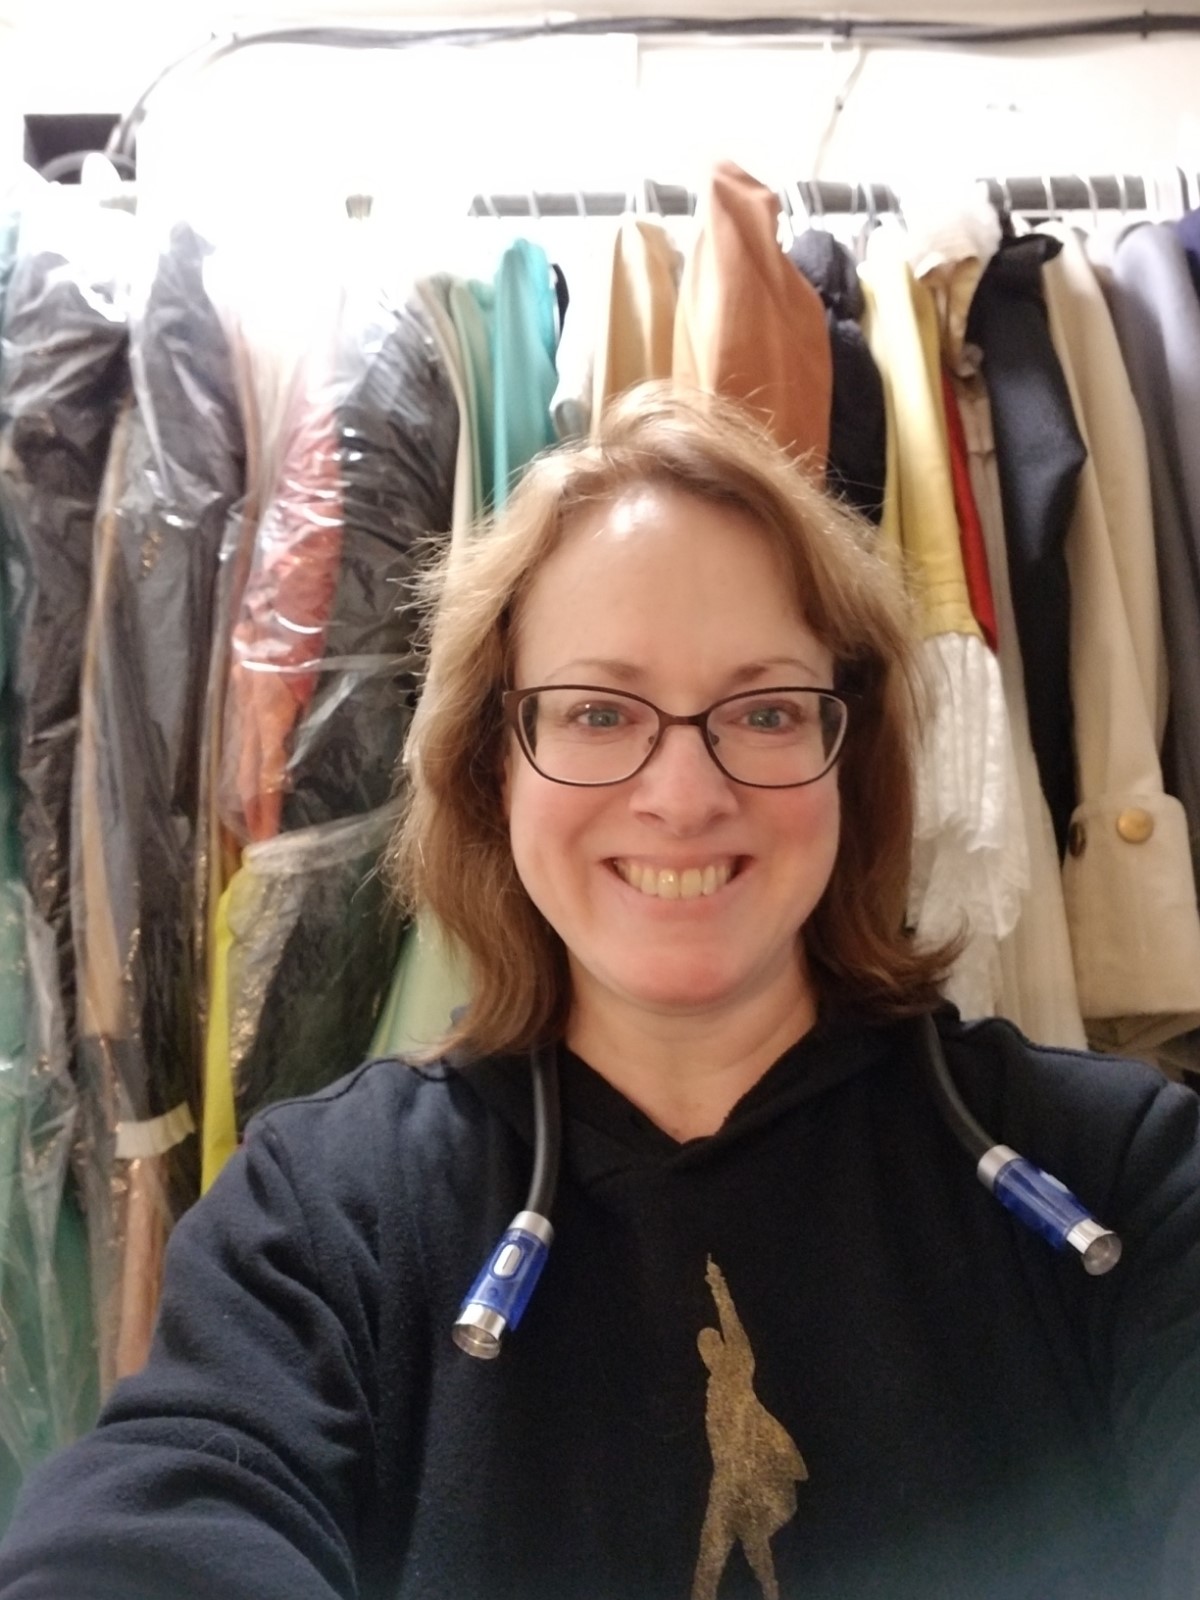 PHOTO: Jeannie Naughton was recognized this year for 25 years of work in the industry by her union. She says the arts are not for "sissies." Here she is pictured backstage with the costumes she maintains for "Hamilton."